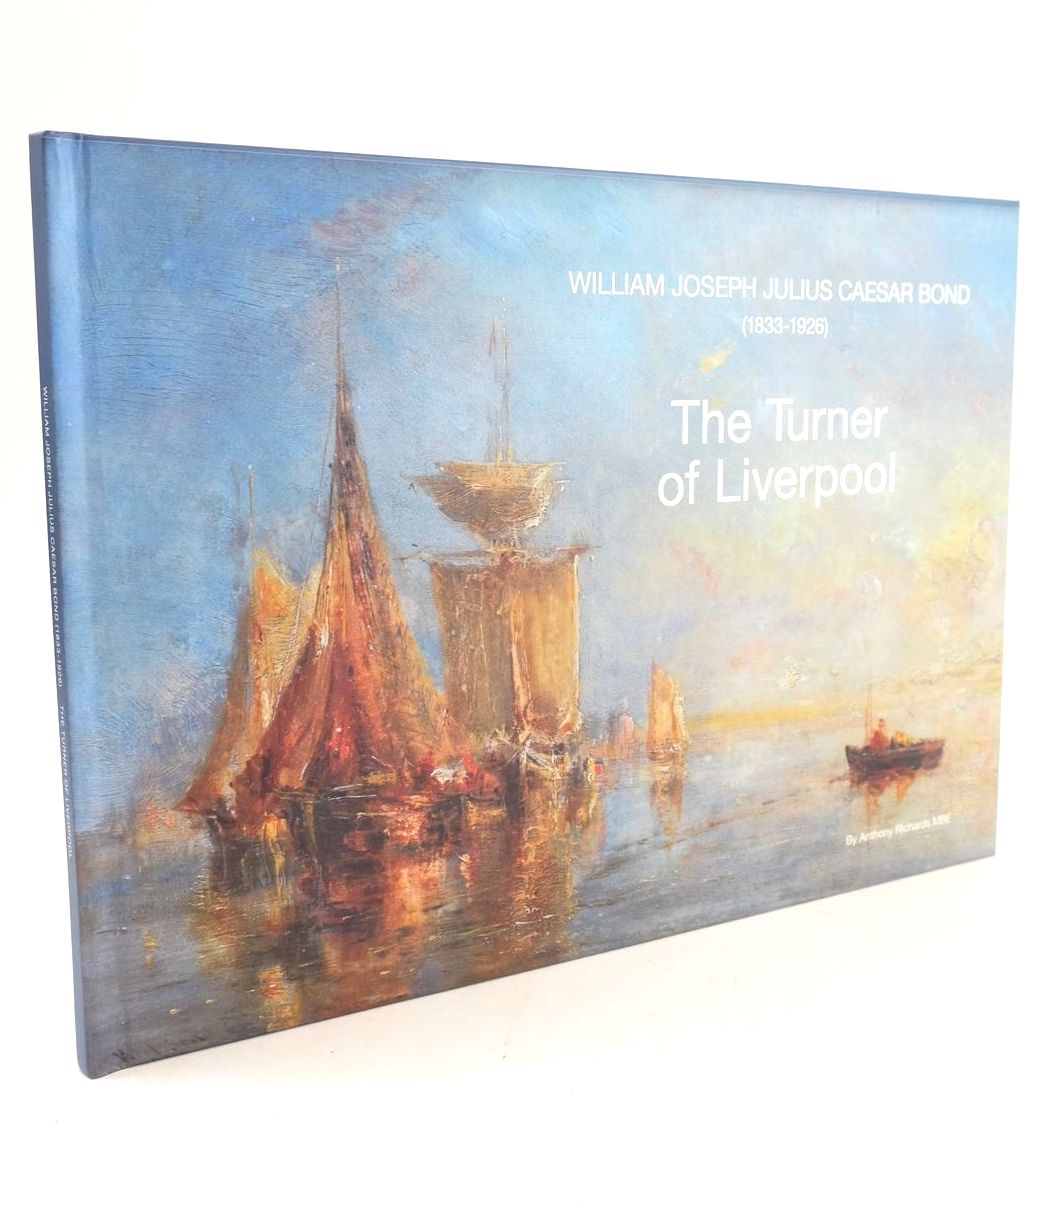 Photo of WILLIAM JOSEPH JULIUS CAESAR BOND (1833-1926) THE TURNER OF LIVERPOOL written by Richards, Anthony illustrated by Bond, W.J.J.C. published by Millennium Centre Limited (STOCK CODE: 1325201)  for sale by Stella & Rose's Books